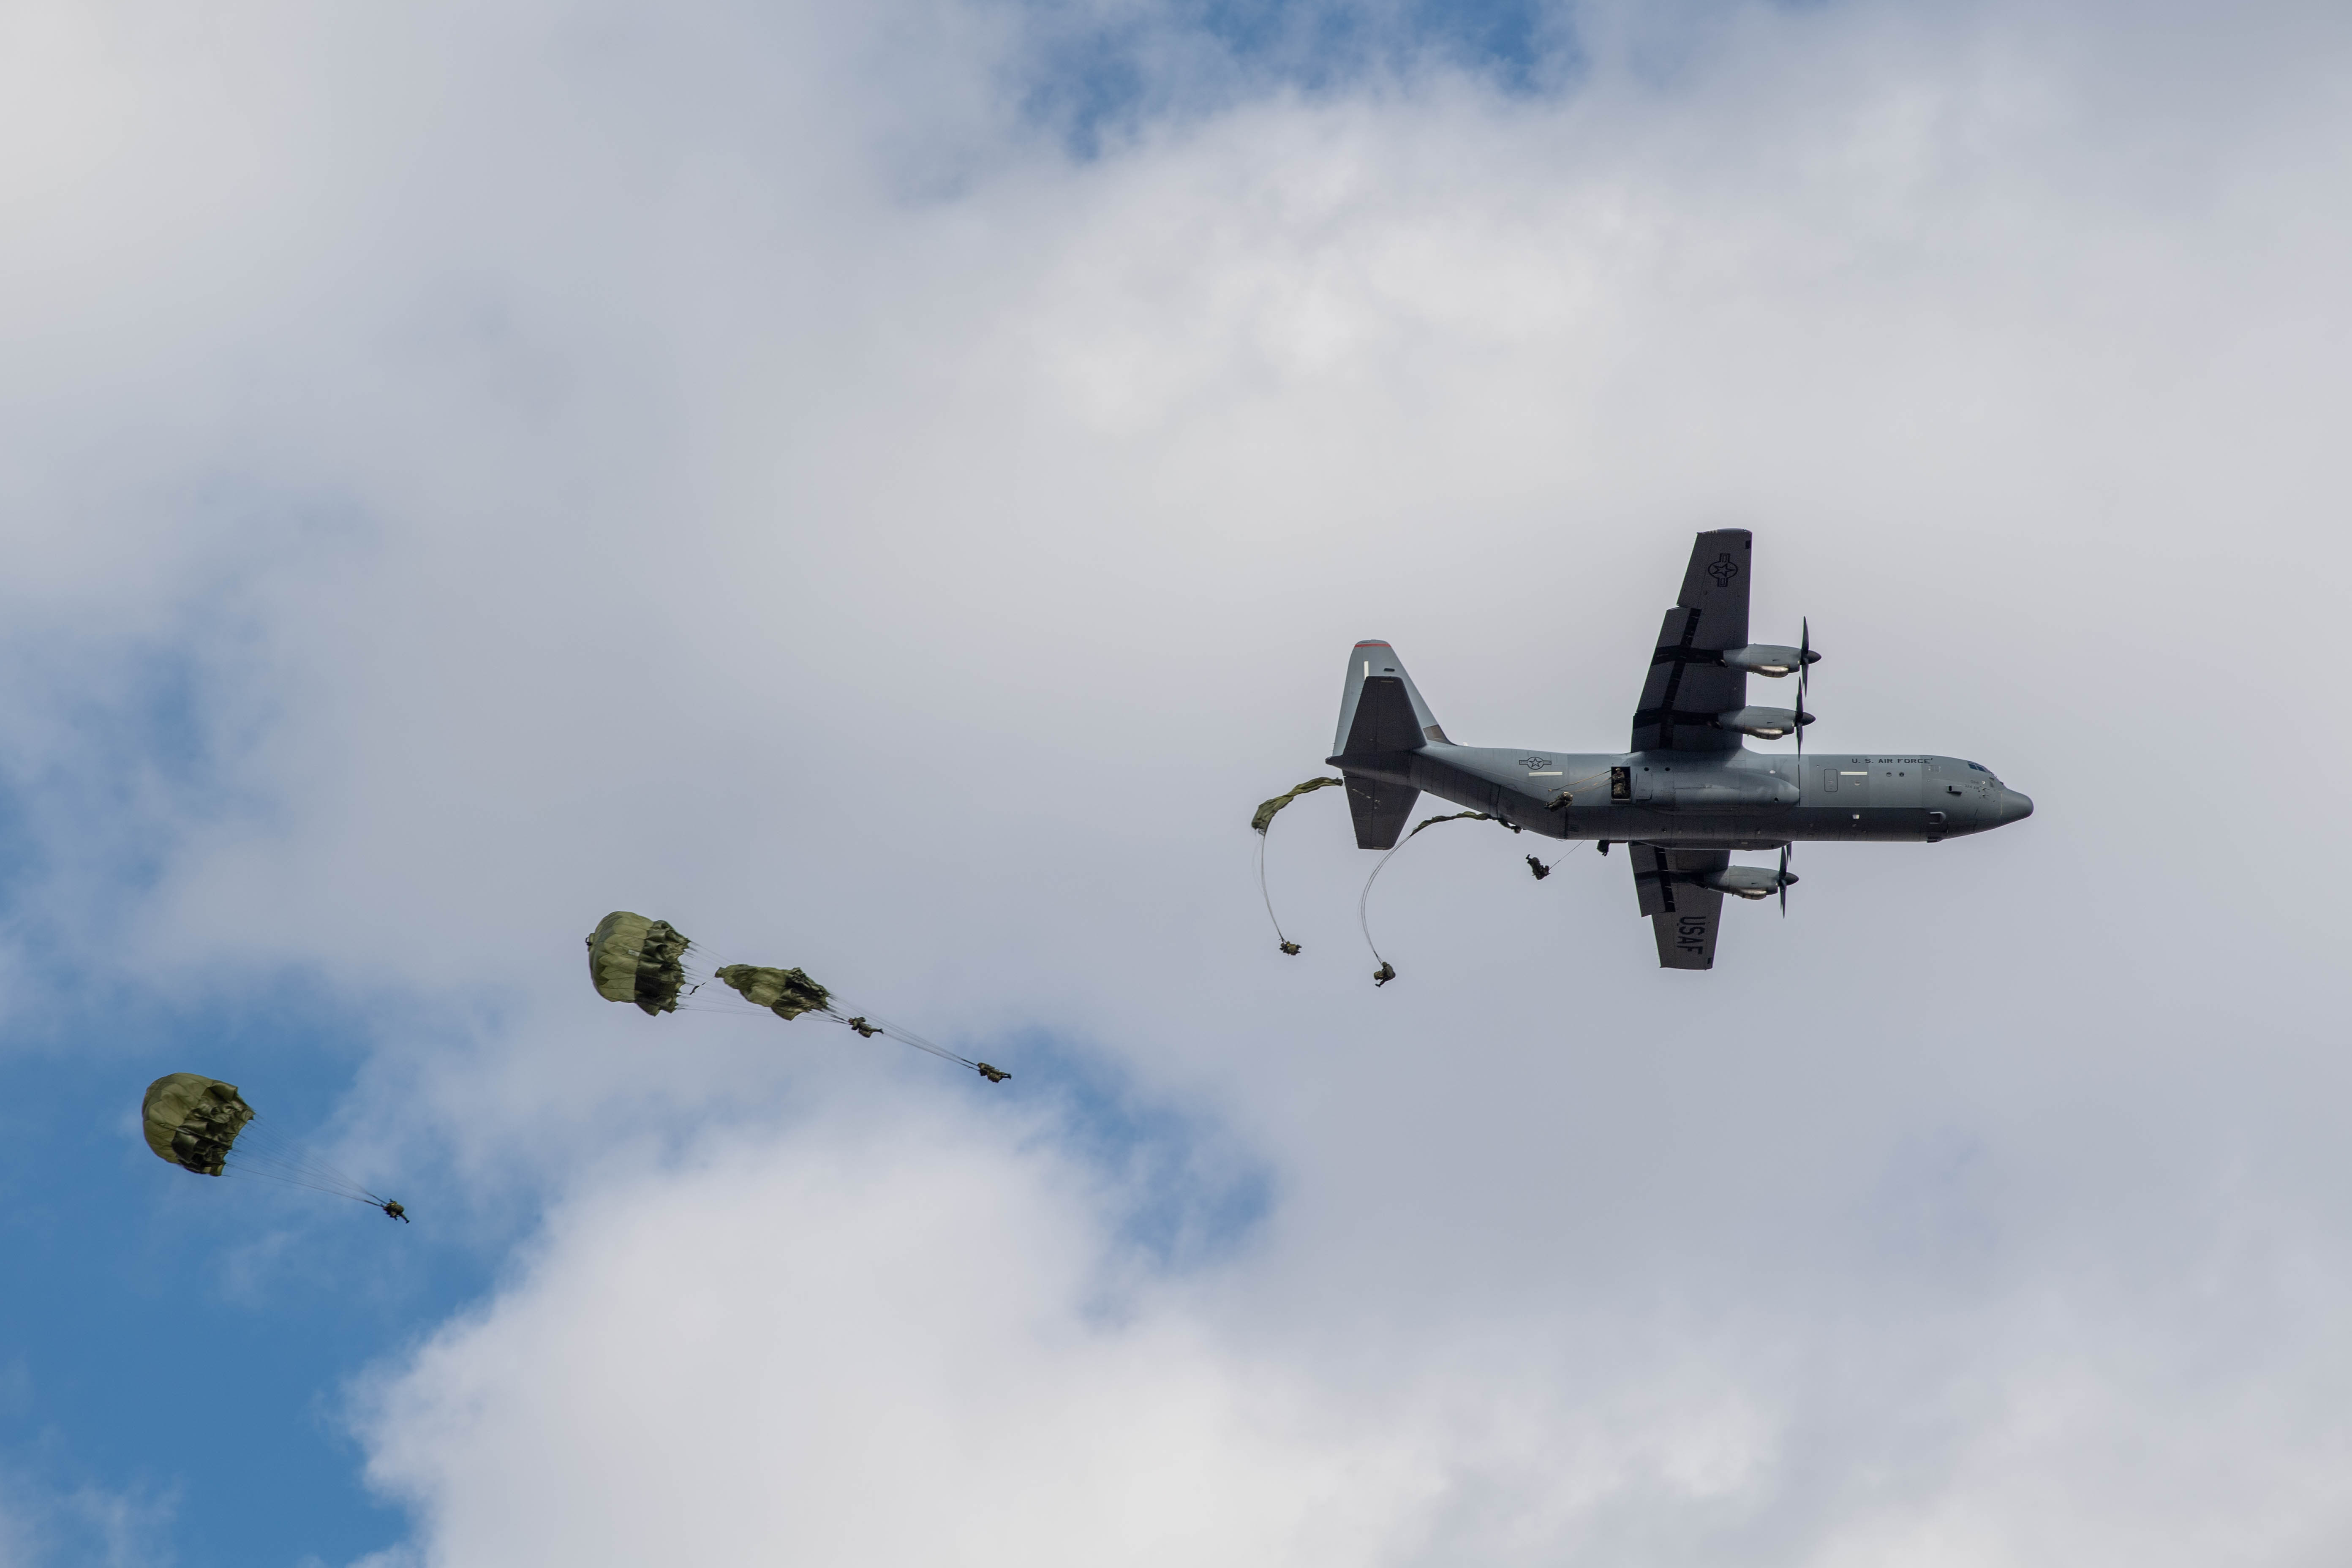 US international airborne forces soar in annual New Year's Jump